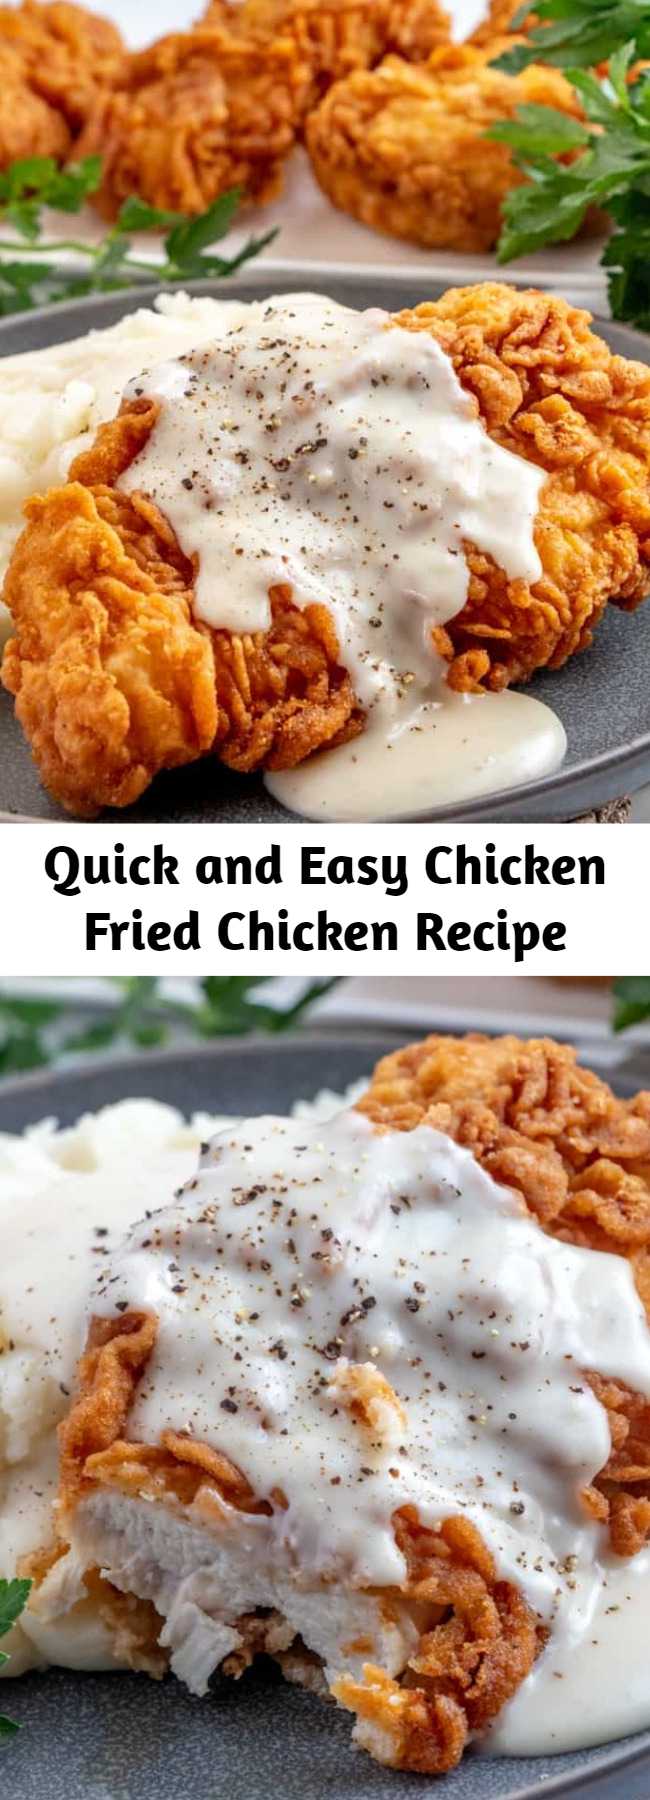 Quick and Easy Chicken Fried Chicken Recipe - Easy and delicious this Chicken Fried Chicken is a quick and flavorful dinnertime recipe that brings the whole family to the table, with minimal ingredients it’s a simple and comforting meal.